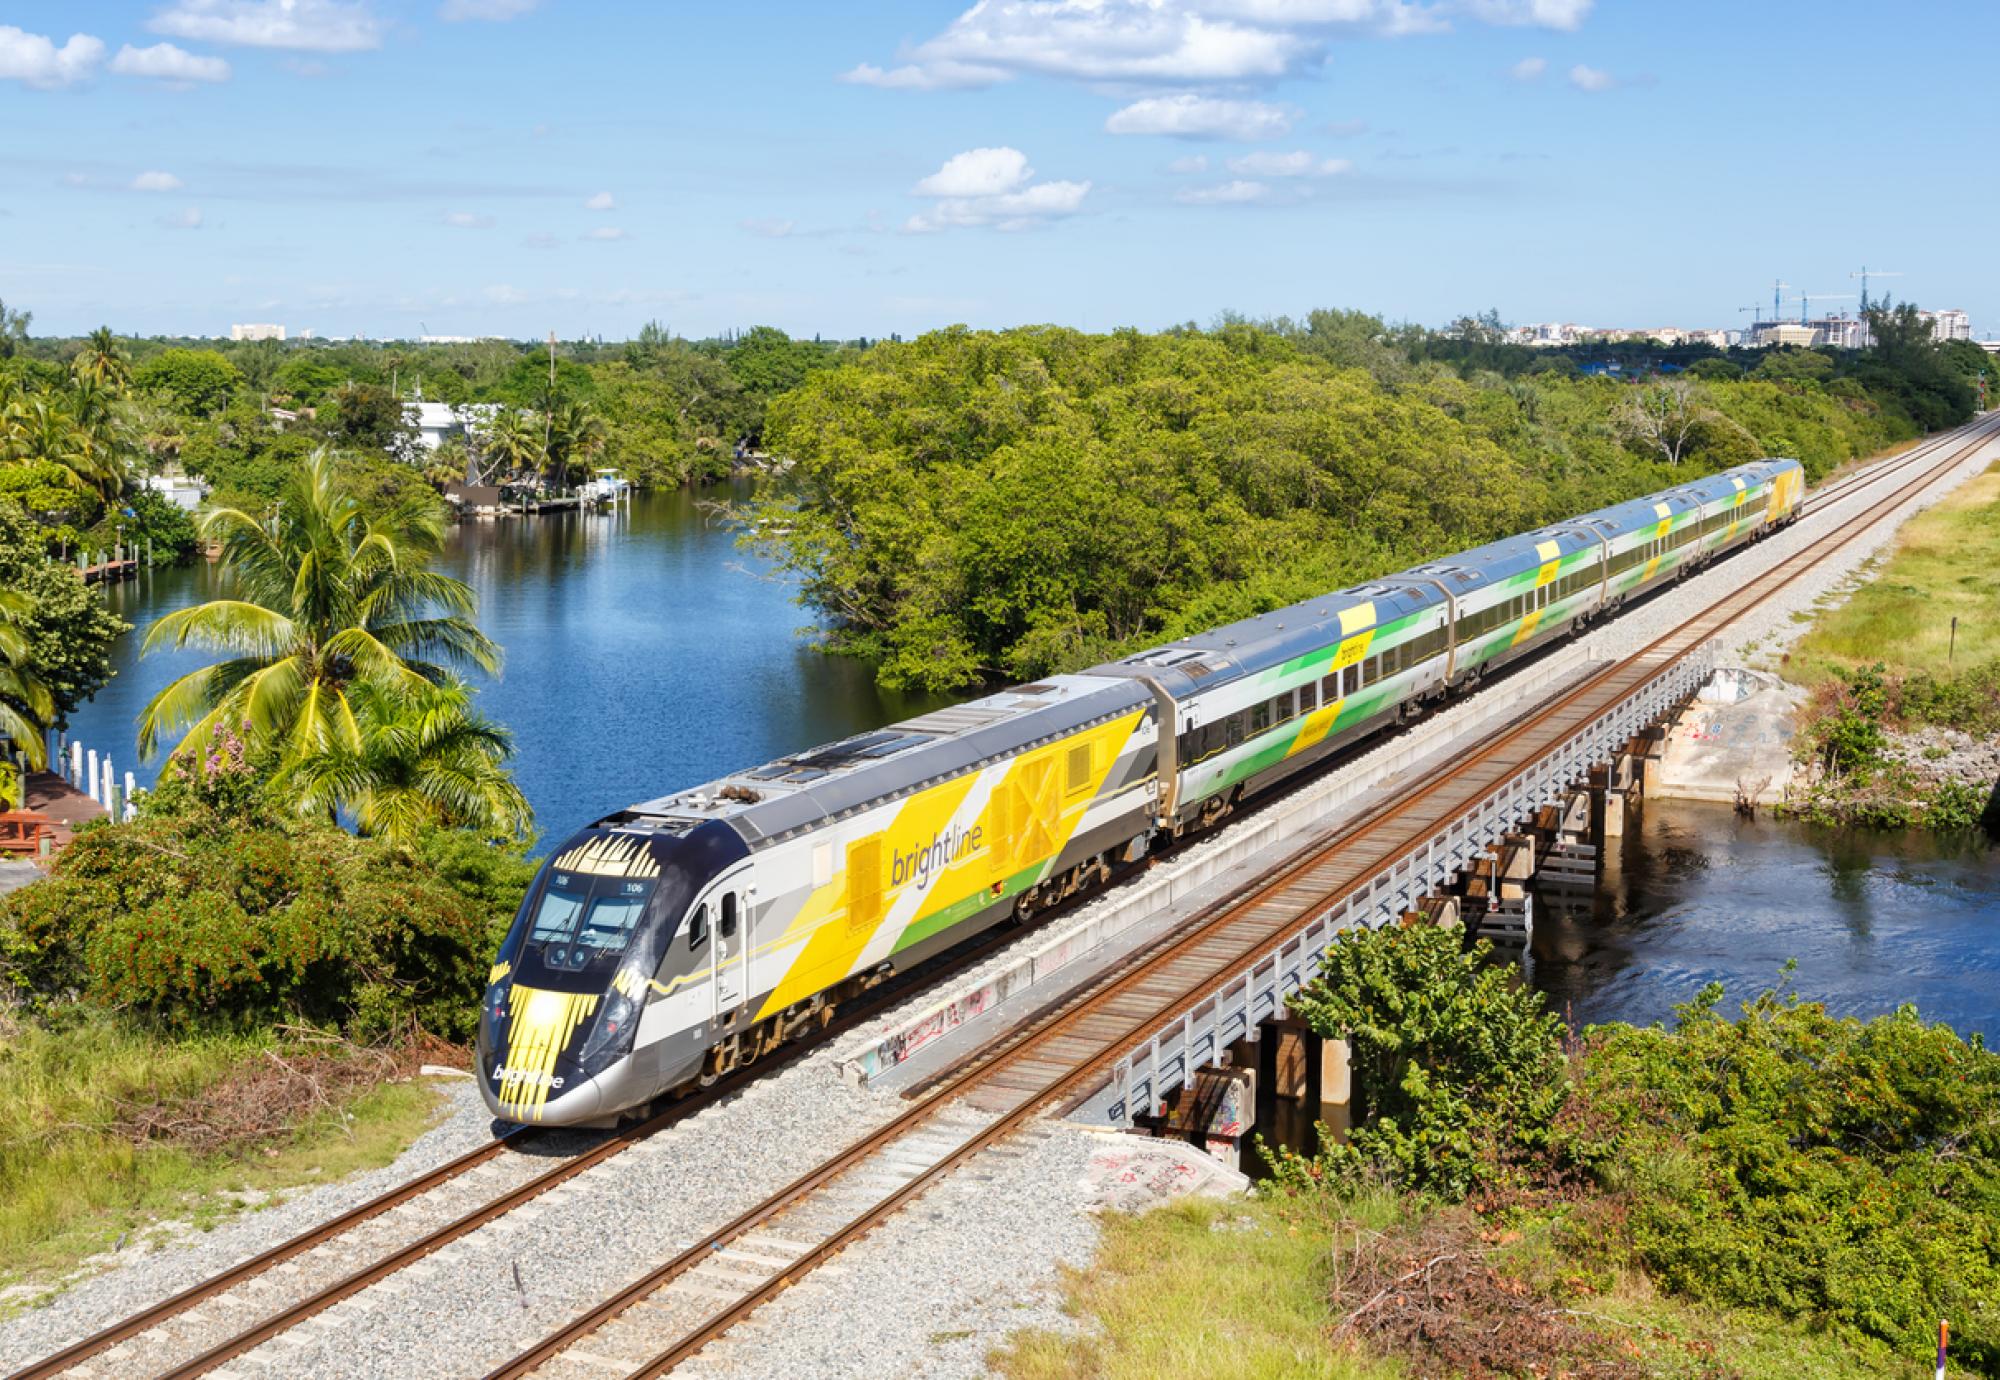 Brightline to develop AI safety system after grant approval